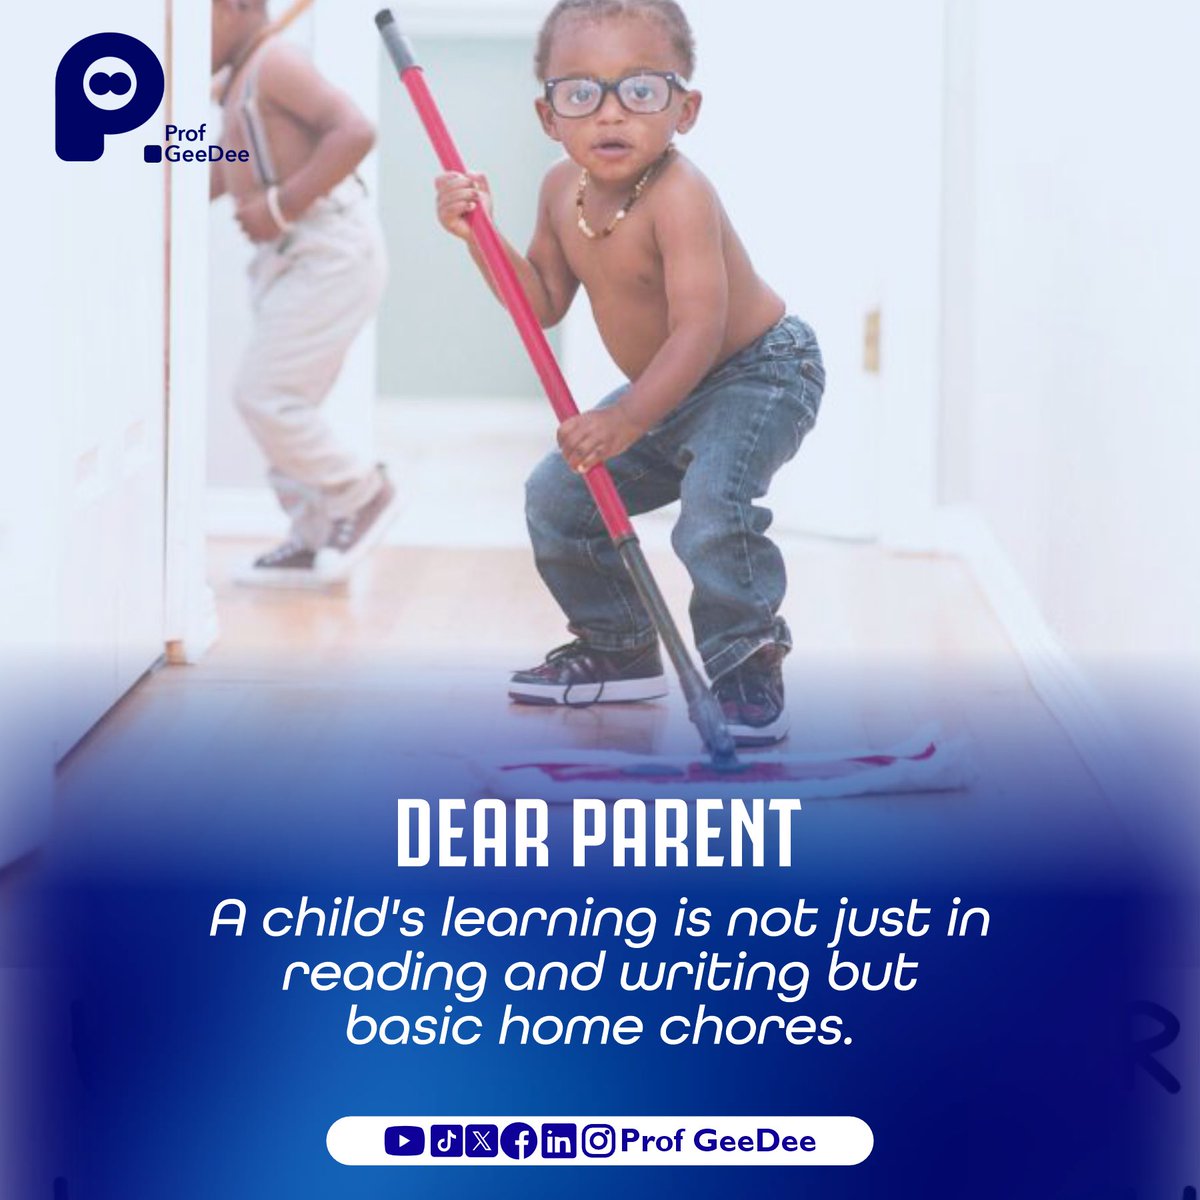 Teaching your child how to do home chores strengthens their cognitive  abilities and trains them.

You can show them how to clean their rooms and you can engage them in such an activity.

#earlyyears
#earlylearning
#earlychildhooddevelopment
#dearparentseries
#profgeedee